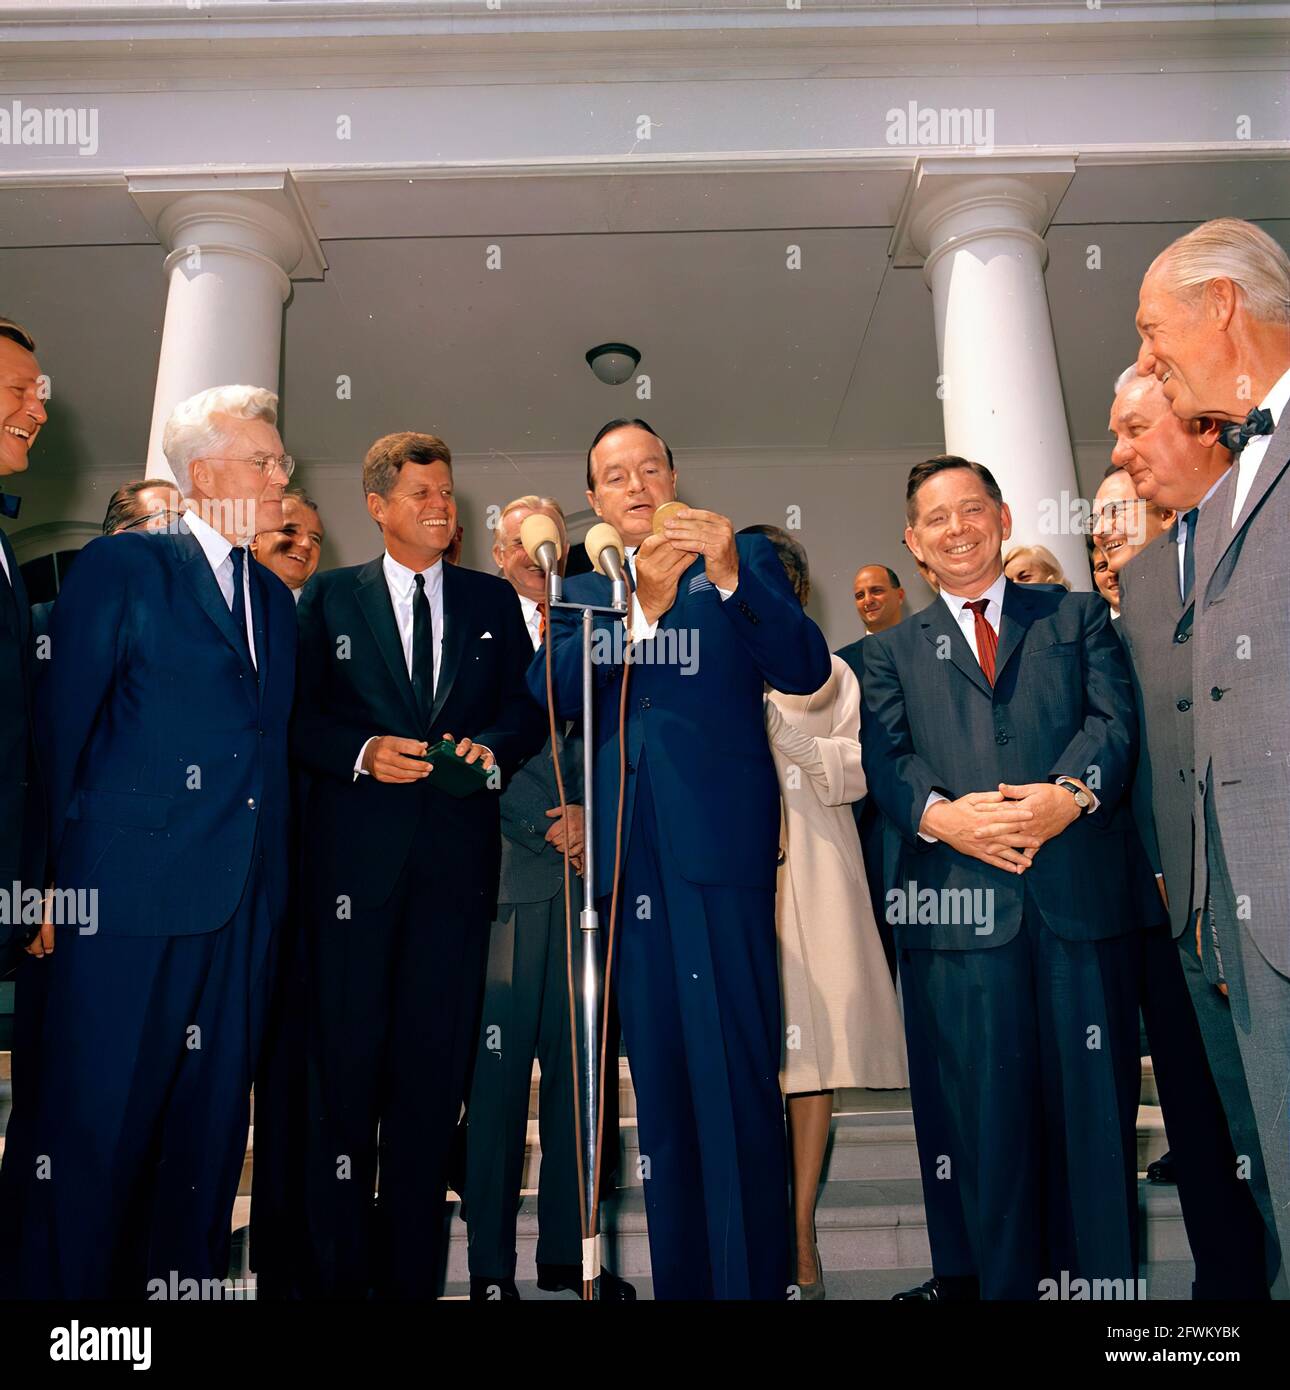 Actor and comedian, Bob Hope, delivers remarks after receiving the Congressional Gold Medal, presented by President John F. Kennedy in recognition of his services to the country as an entertainer during World War II. Left to right: unidentified; Representative Michael A. Feighan (Ohio); President Kennedy; Mr. Hope’s wife, Dolores Hope; Mr. Hope; unidentified (behind Mr. Hope); Senator Stuart Symington (Missouri); Representative Carl Albert (Oklahoma); Representative Leslie C. Arends (Illinois). Also pictured (standing at left, in background): Naval Aide to the President, Captain Shepard. Stock Photo